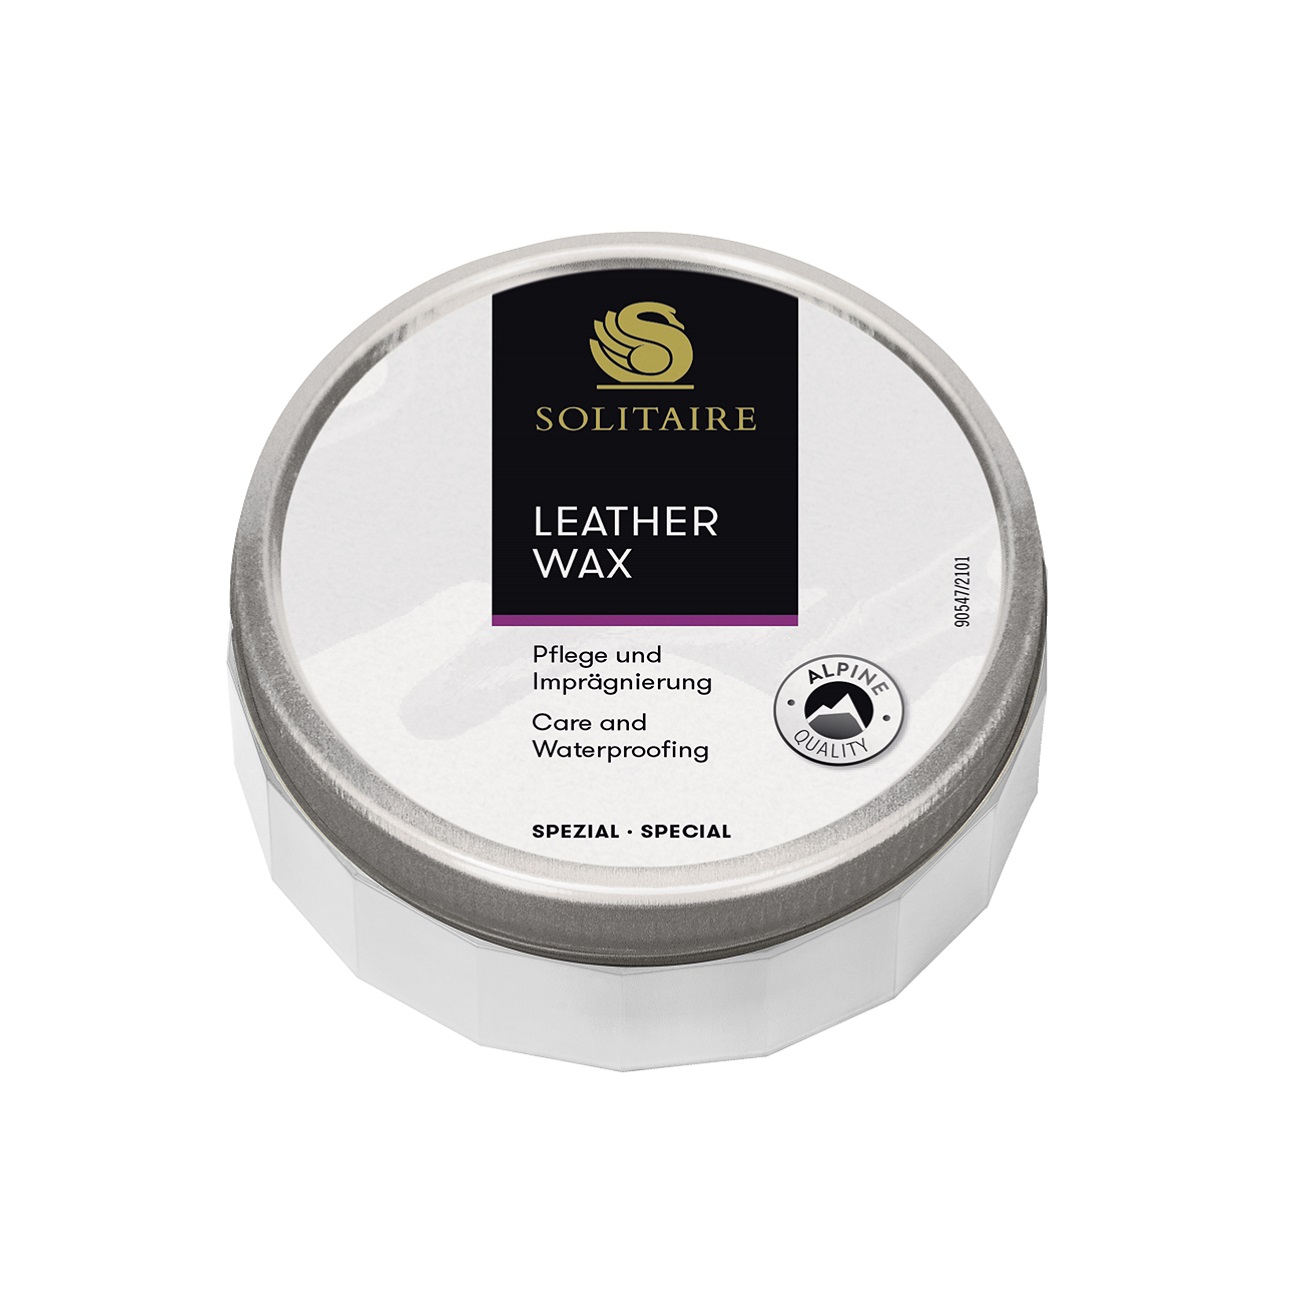 SOLITAIRE LEATHER WAX